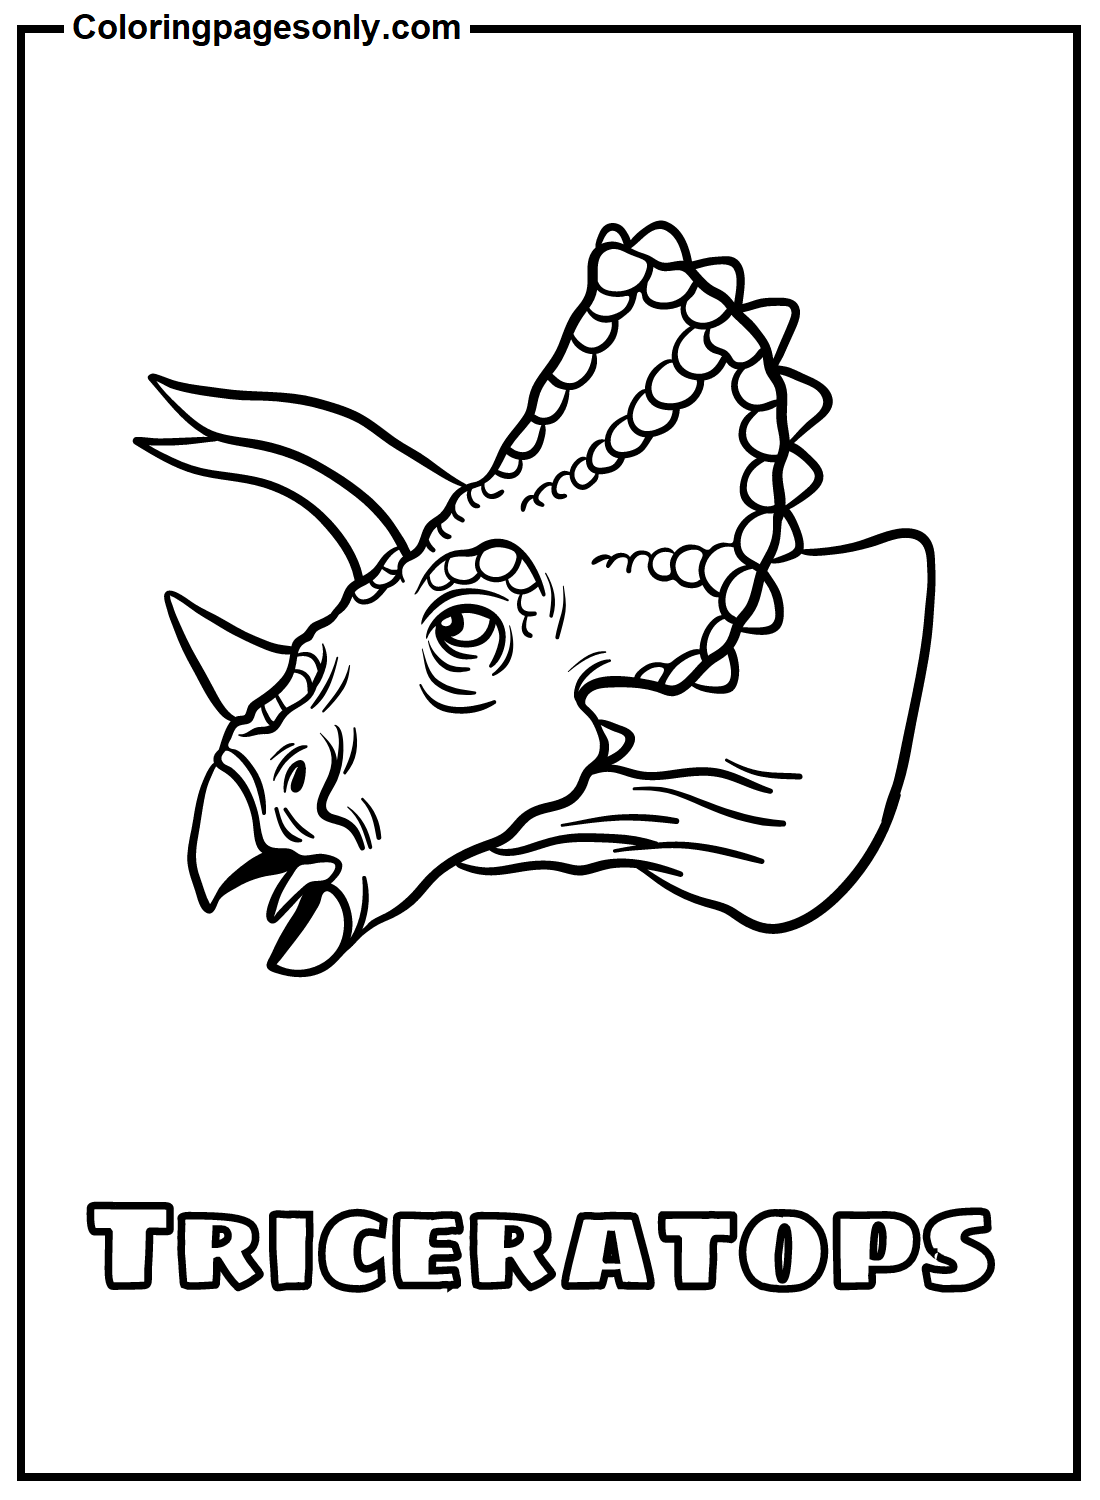 Triceratops Free Coloring Page